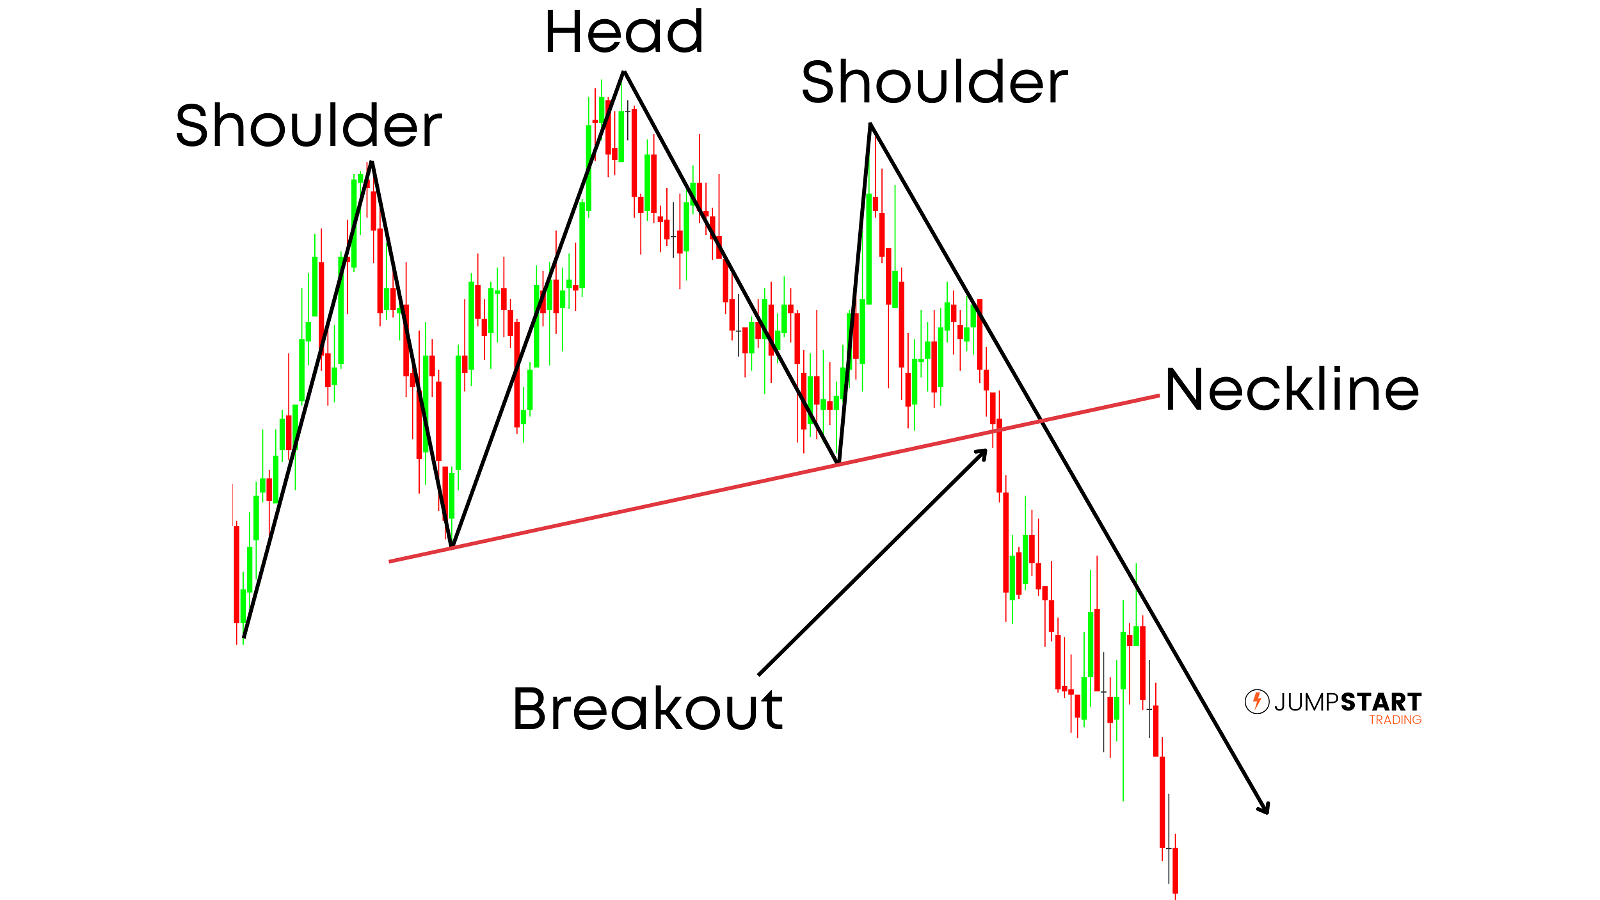 Price forming a bearish head and shoulders structural pattern